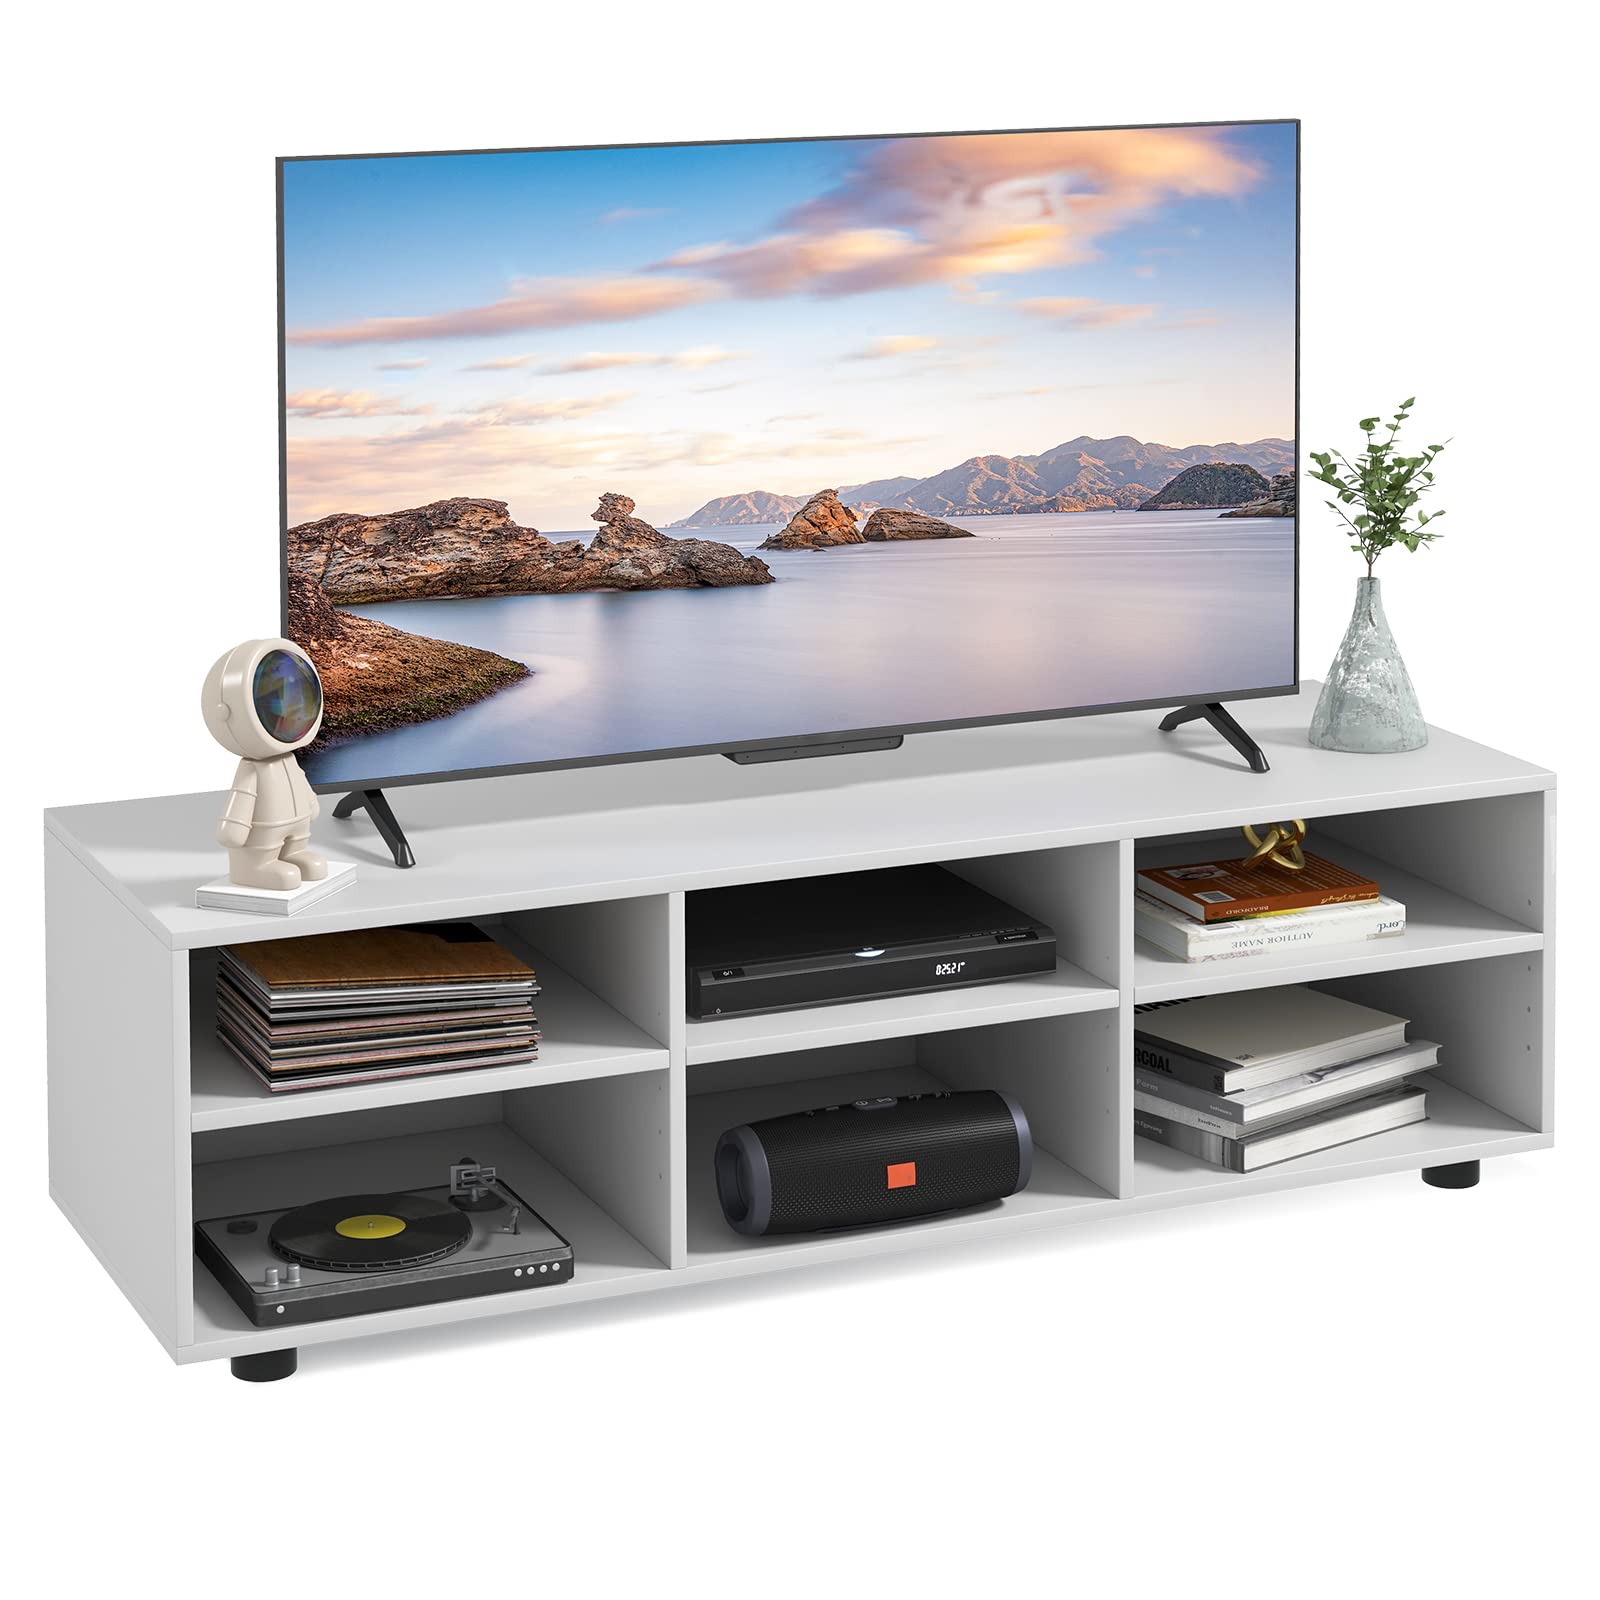 Giantex TV Stand with Cube Storage - TV Console Cabinet w/ 6 Open Compartments